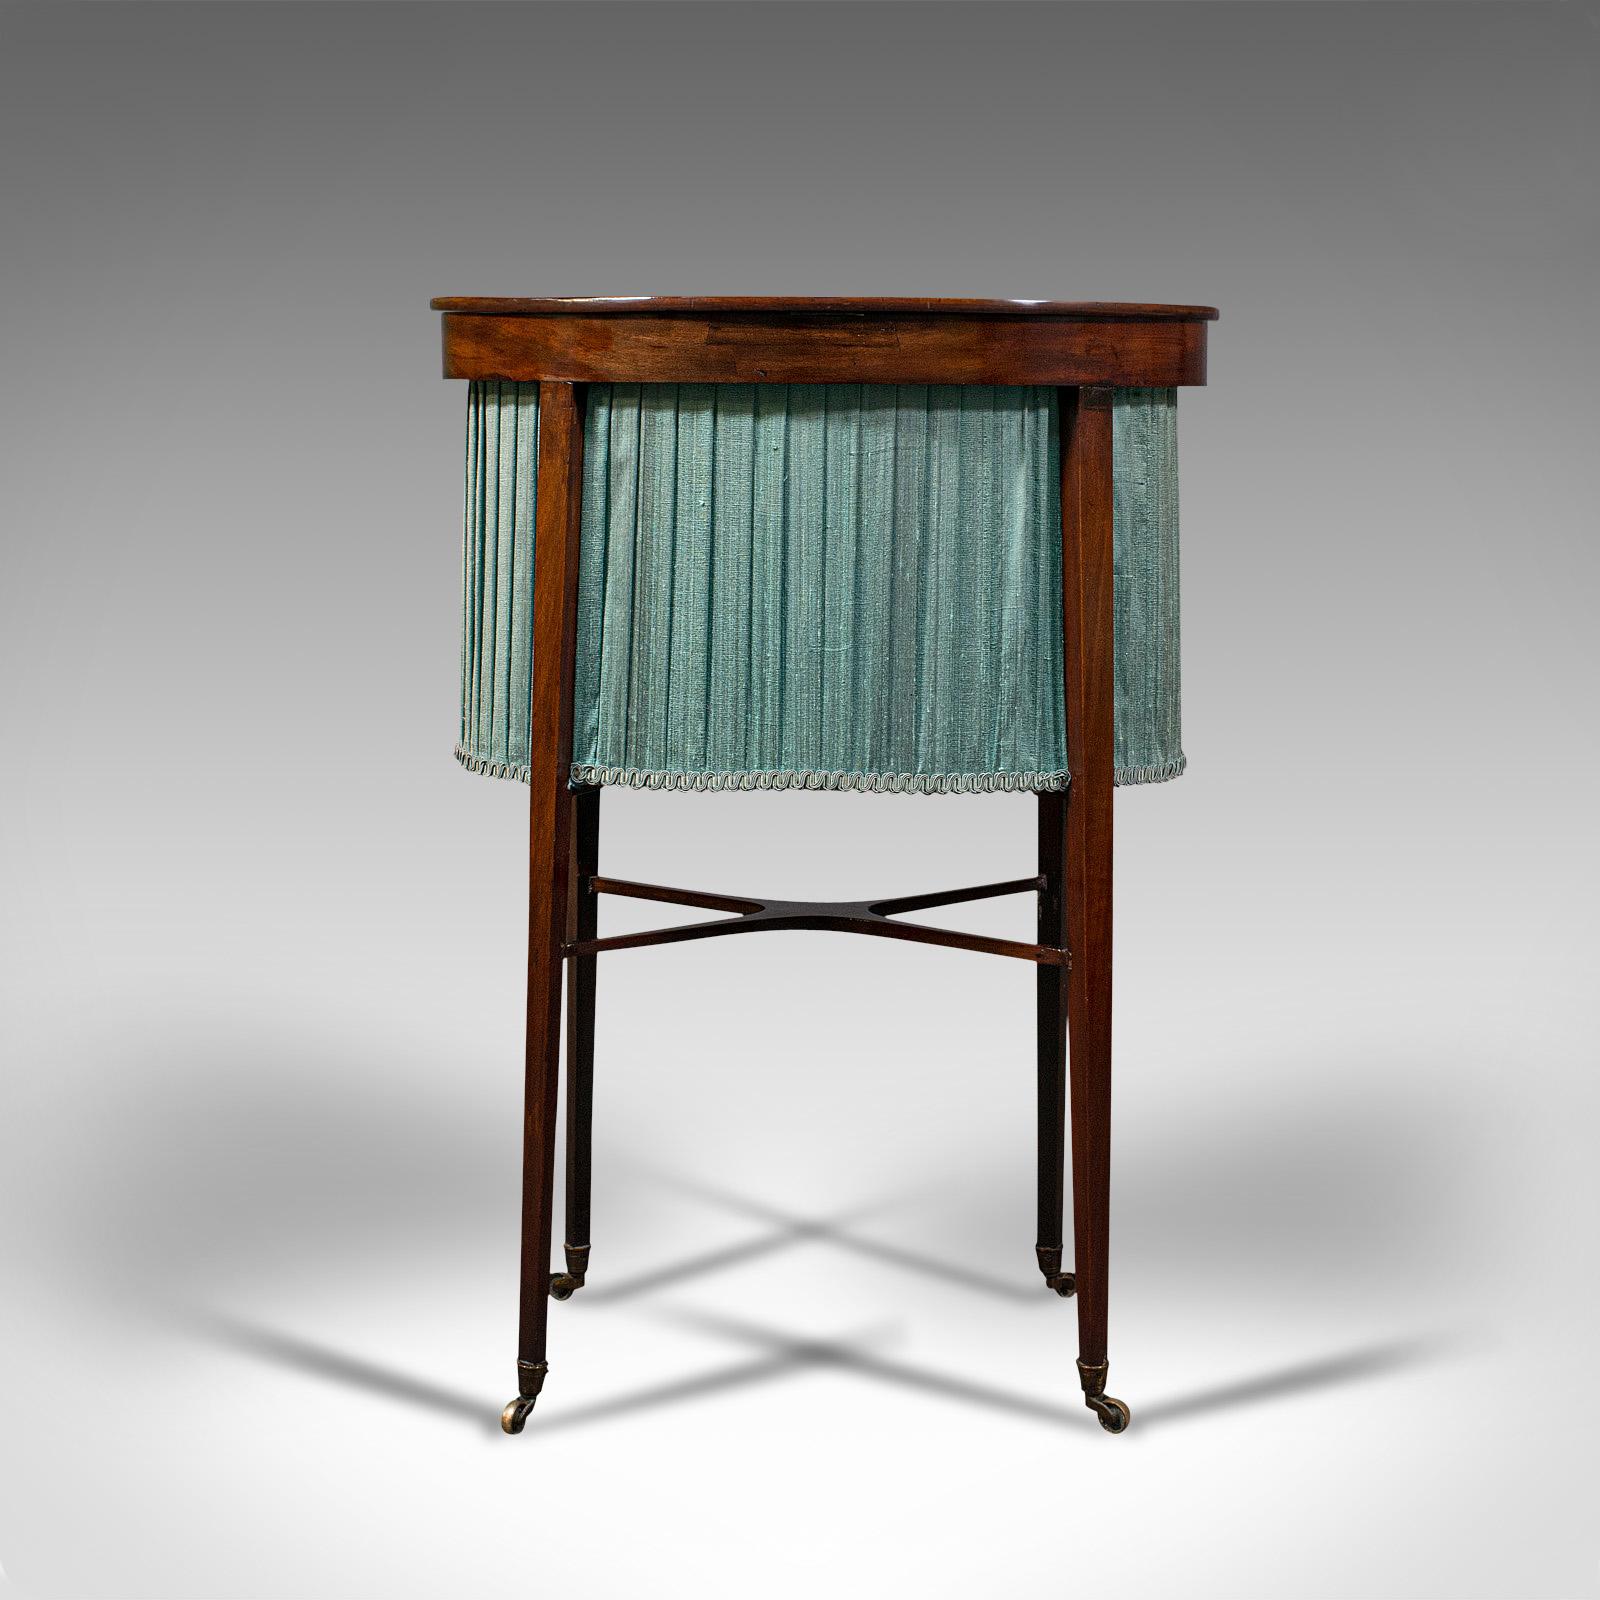 Antique Sewing Table, English, Mahogany, Silk Cotton, Work, Regency, Circa 1820 For Sale 1